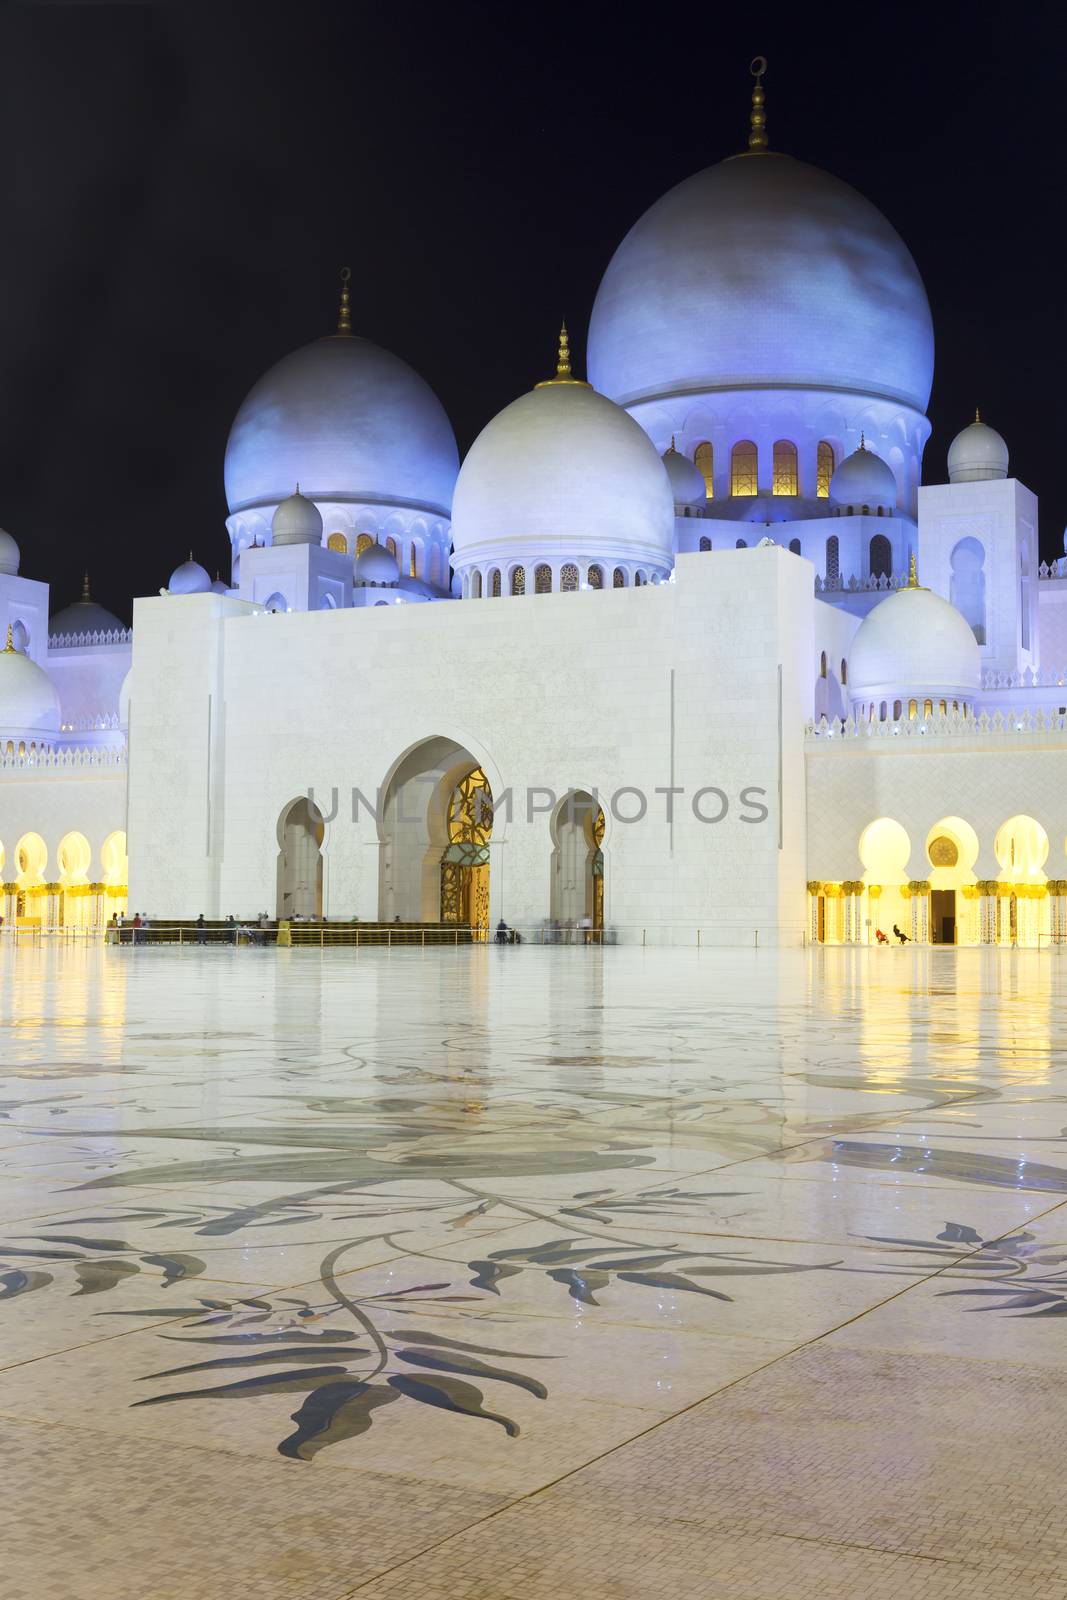 In the famous Abu Dhabi Sheikh Zayed Mosque by night, UAE.